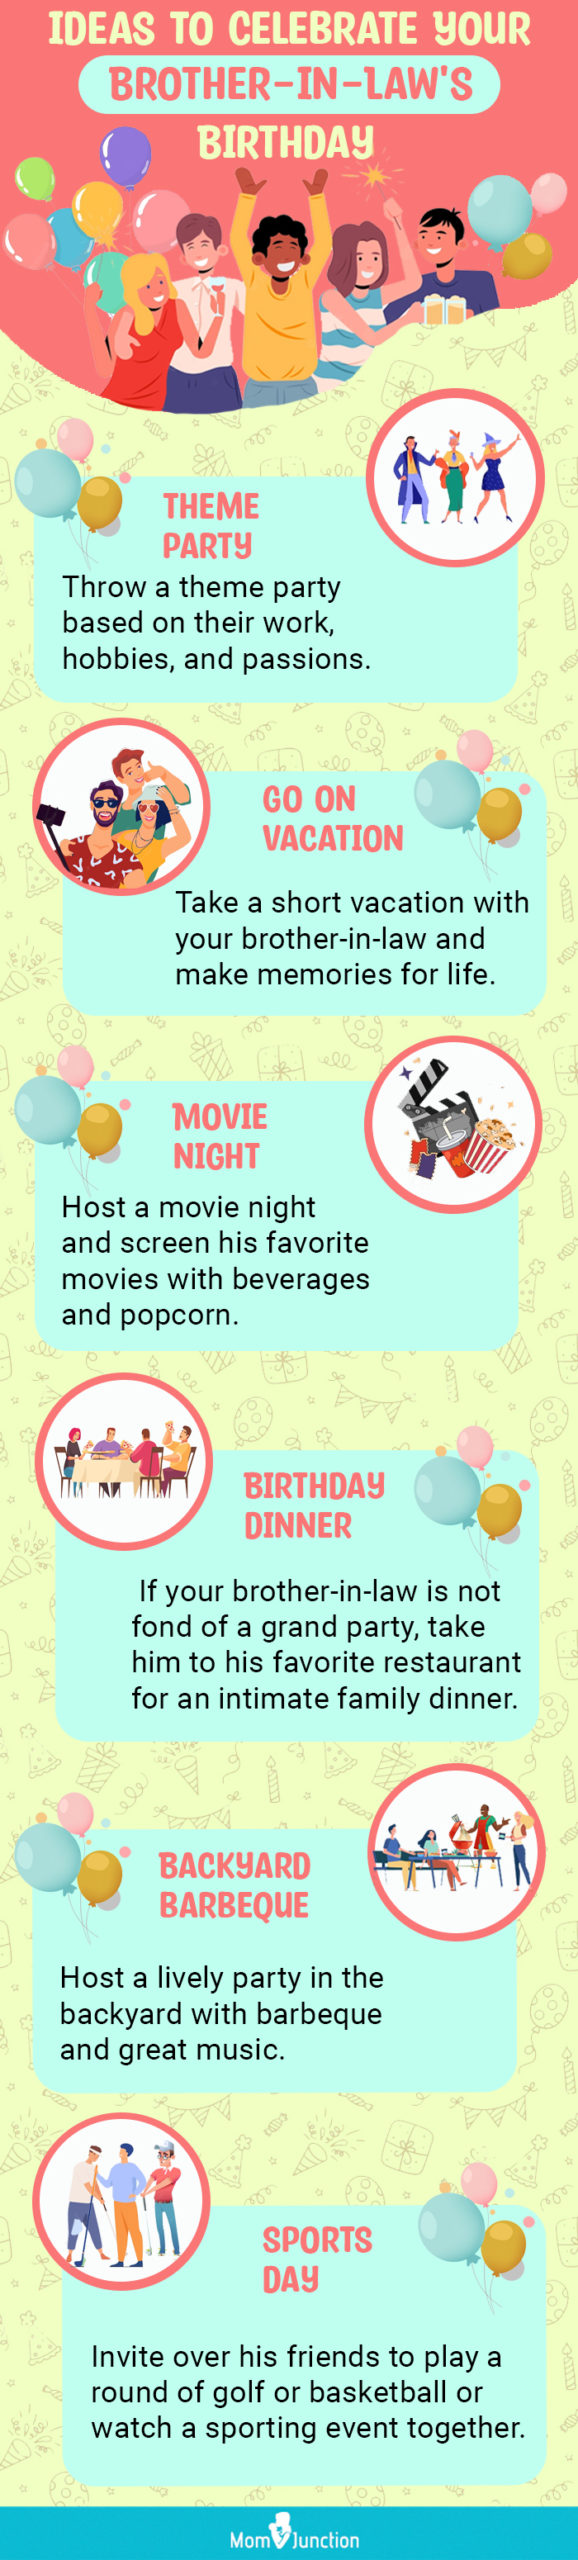 birthday celebration ideas for brother-in-law (infographic)